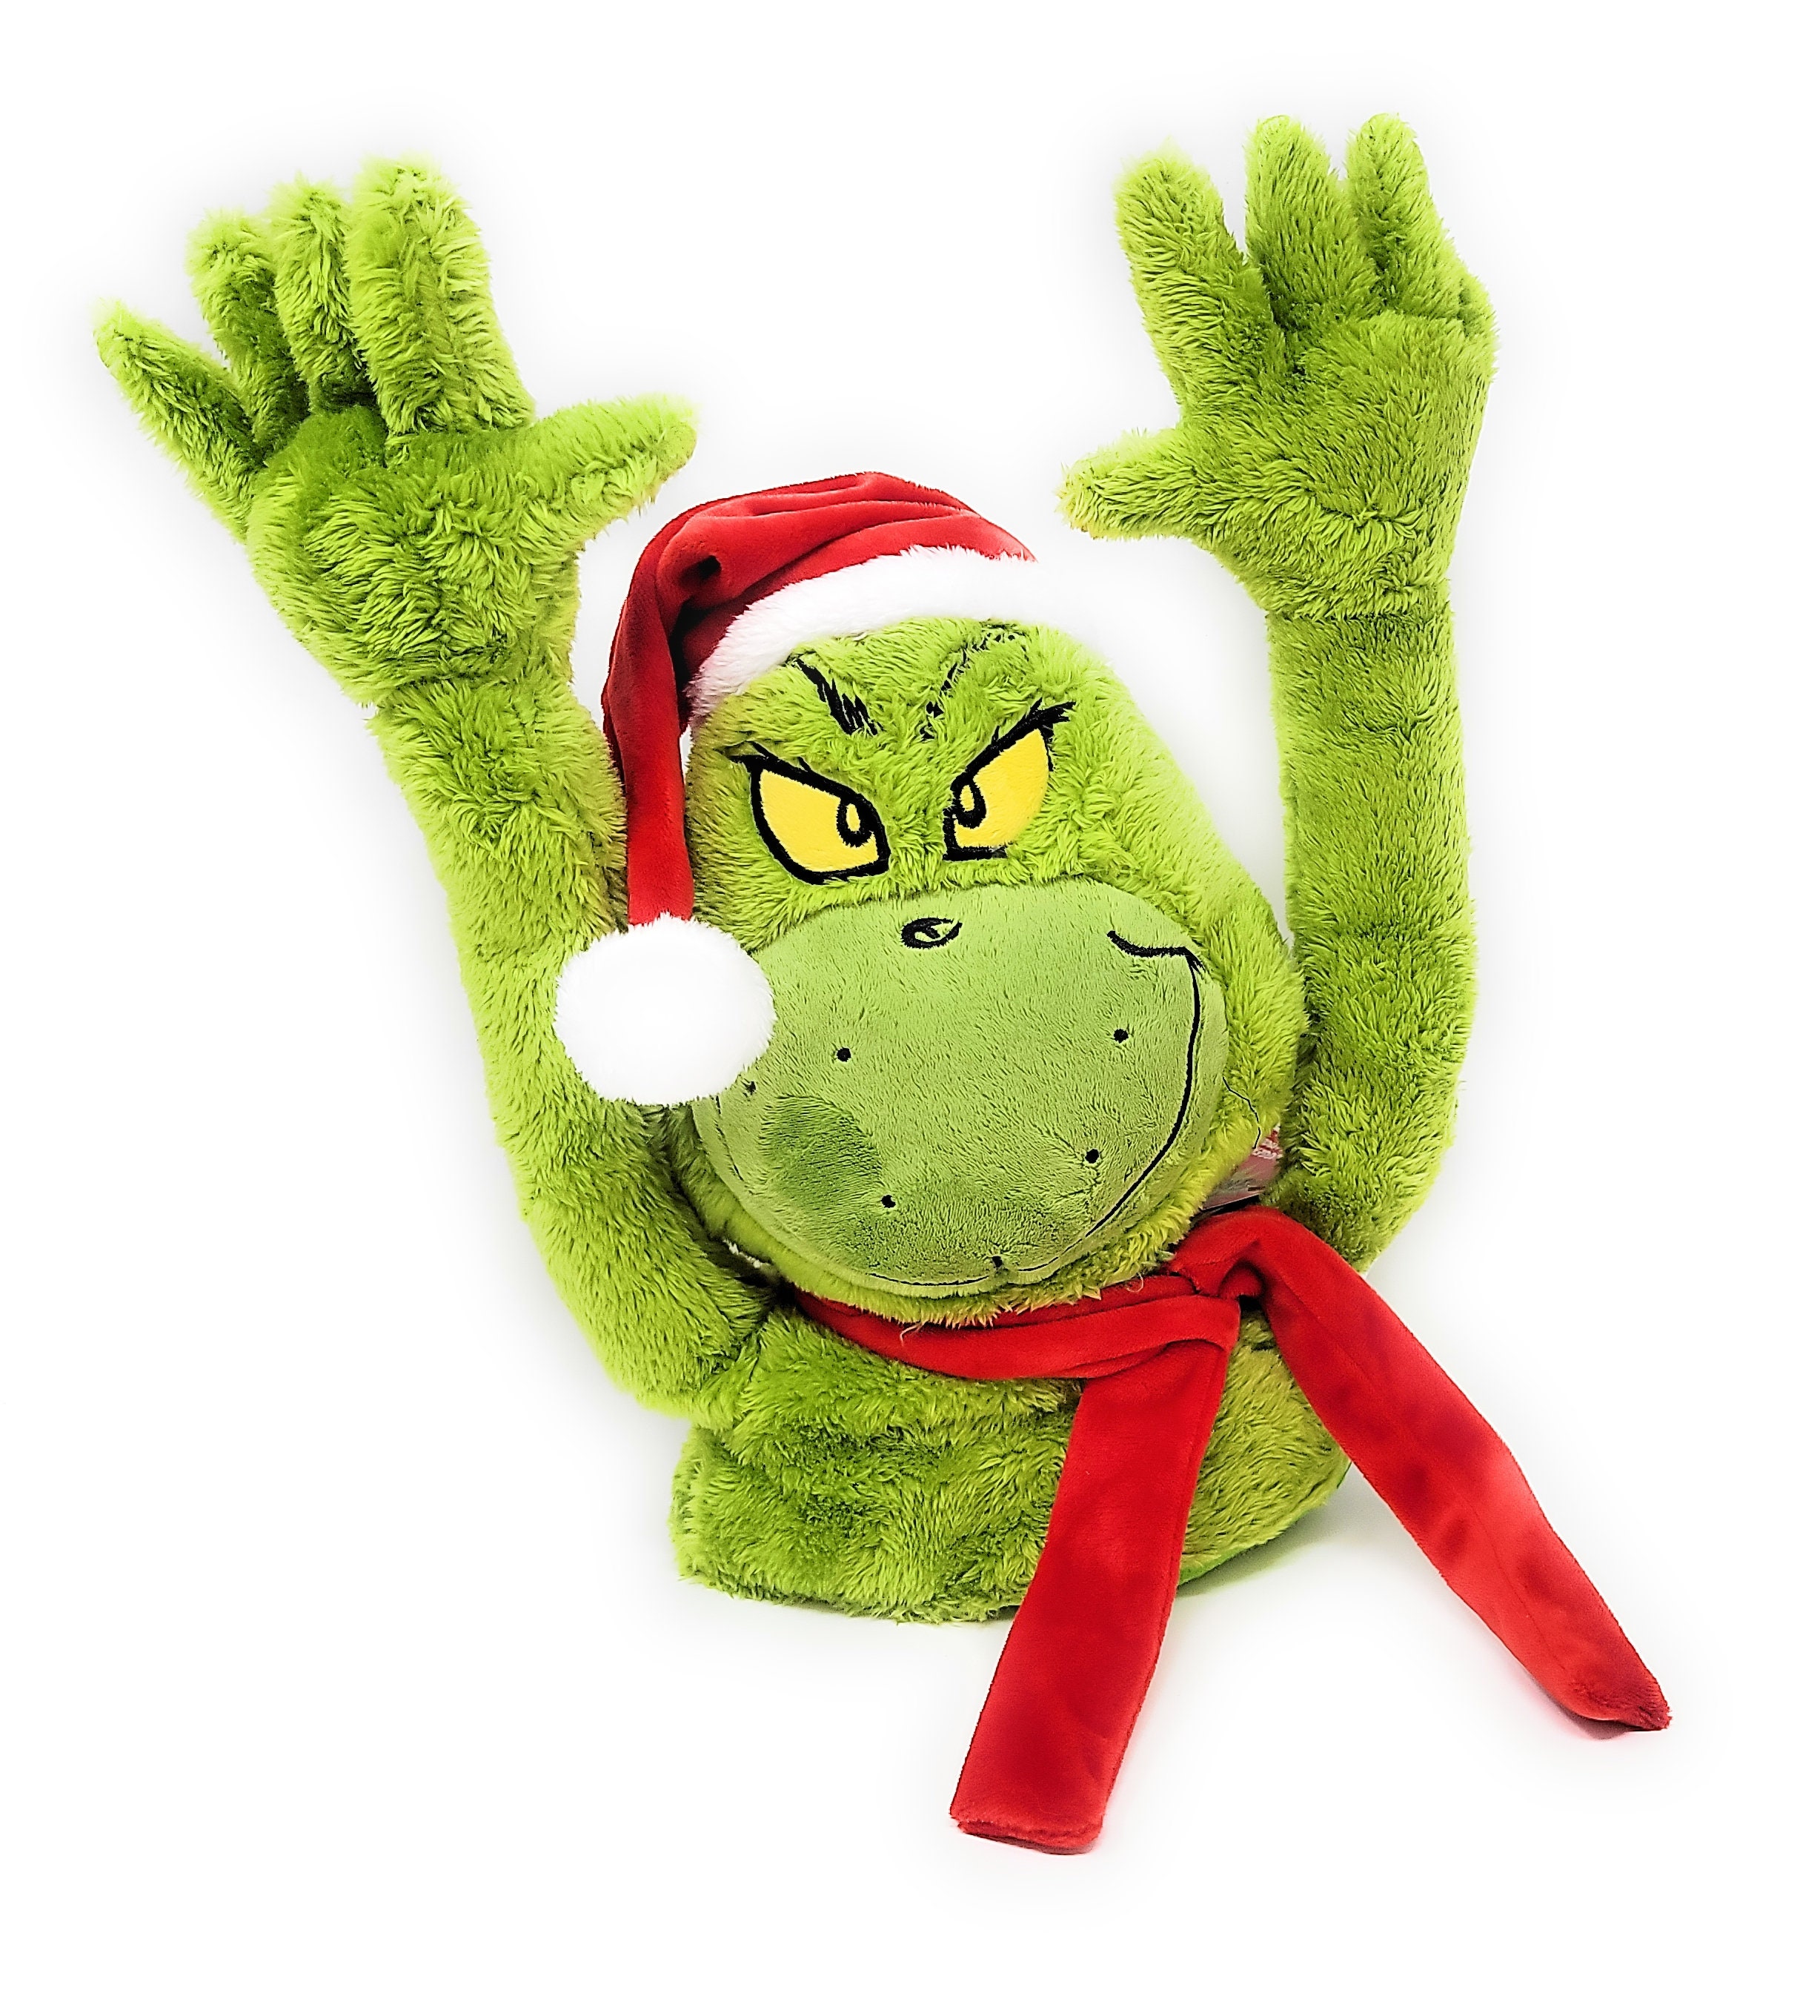 Insanely Adorable Grinch Cooking Tools